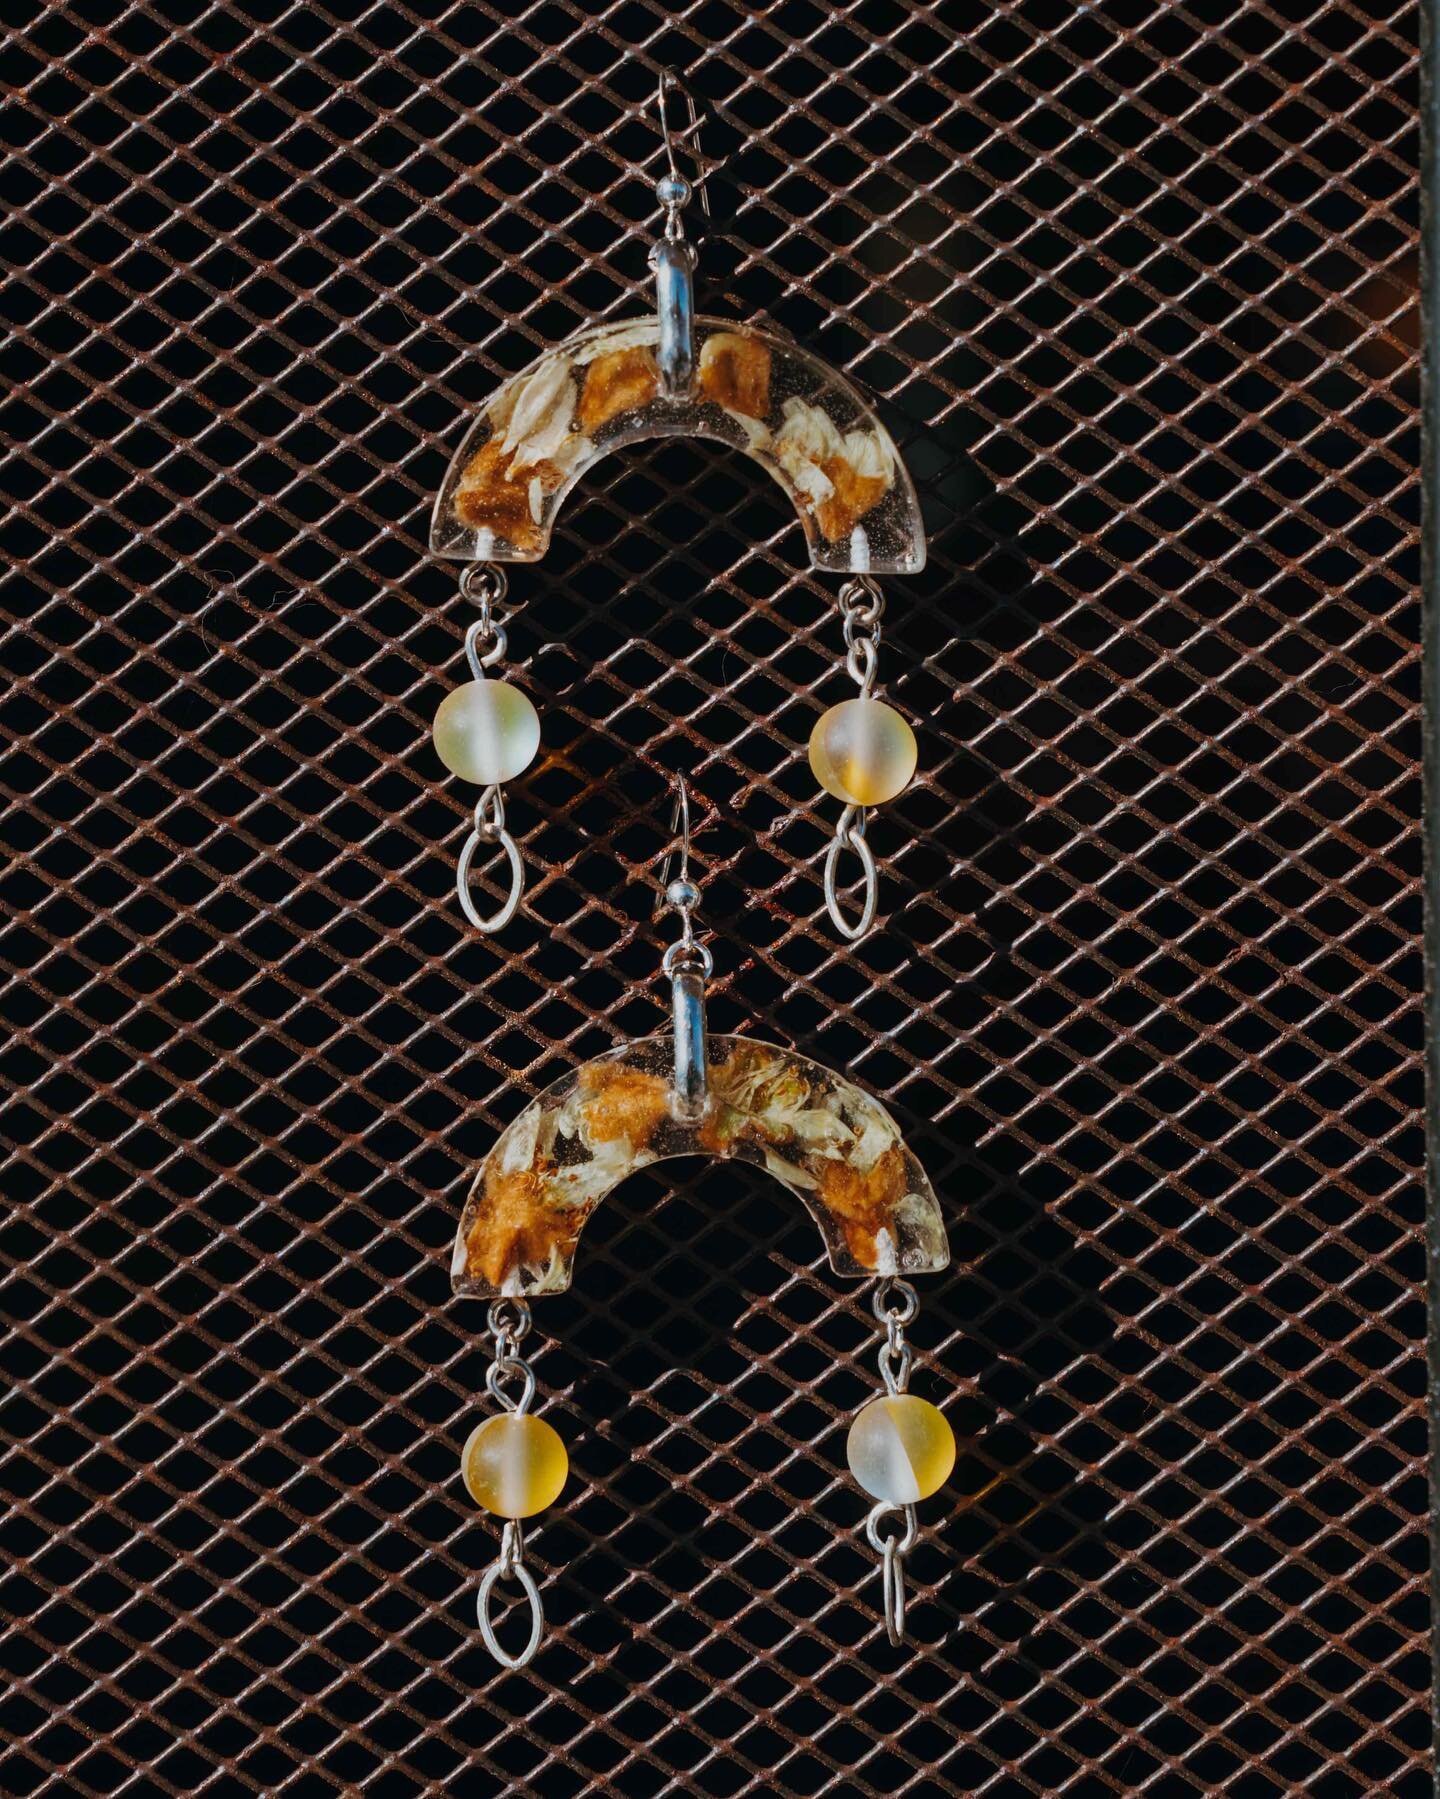 one pair of loquat bloom earrings left $25 local dropoff, $35 shipped